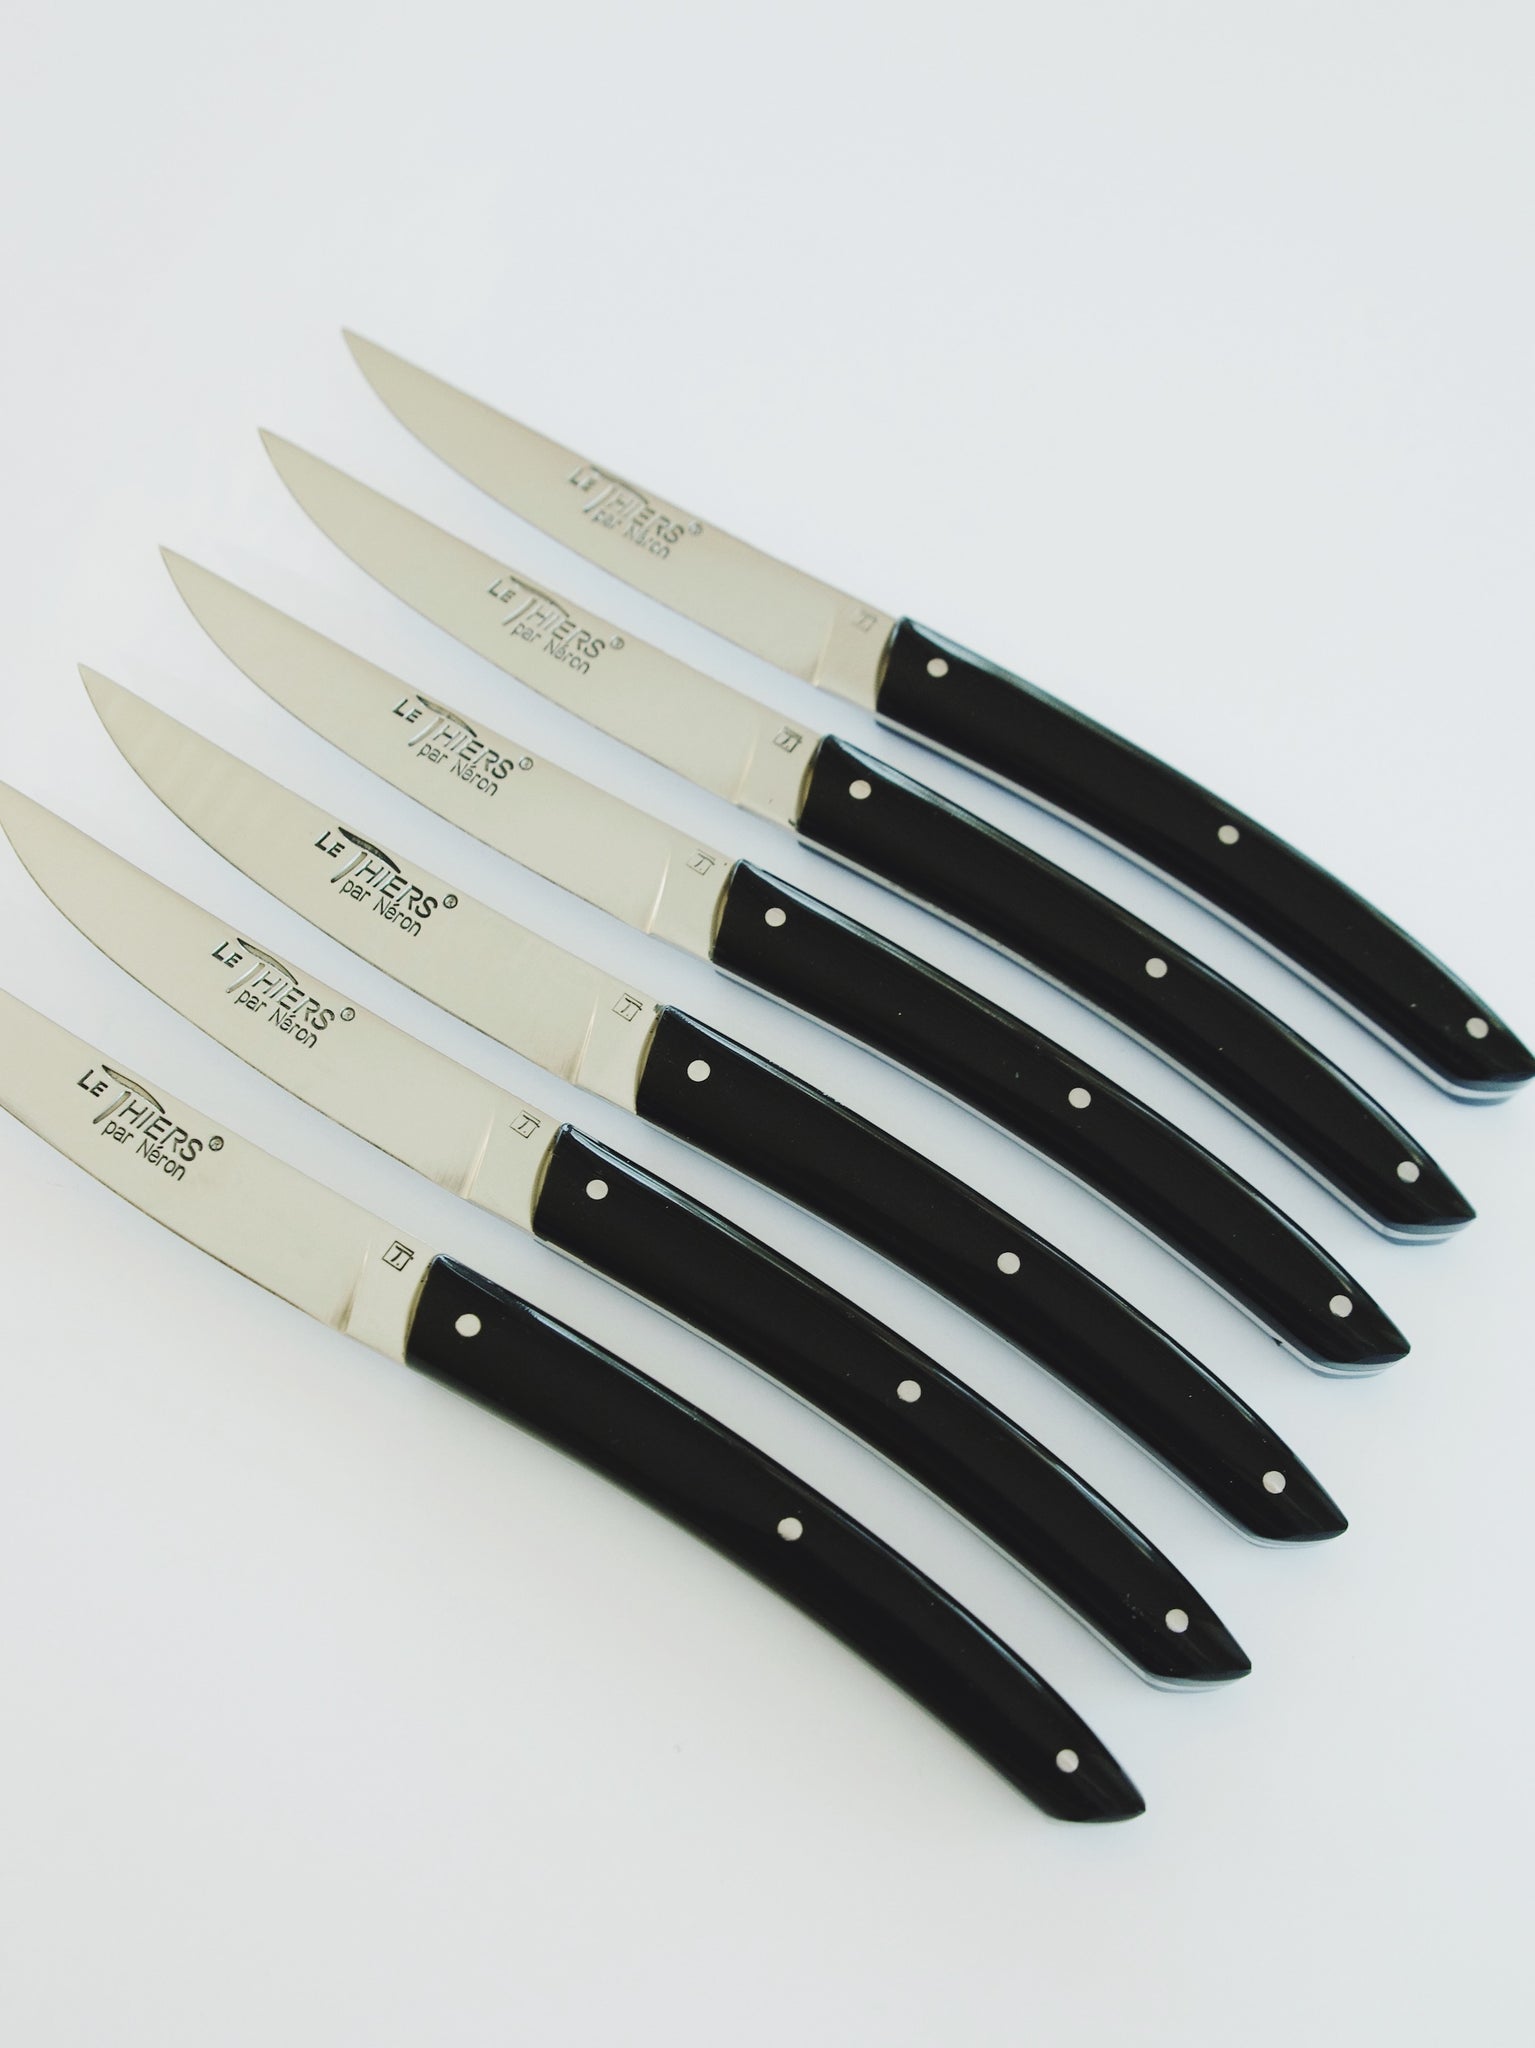 Row of six knives with black handles. Blade reads 'Le Thiers par Neron'.